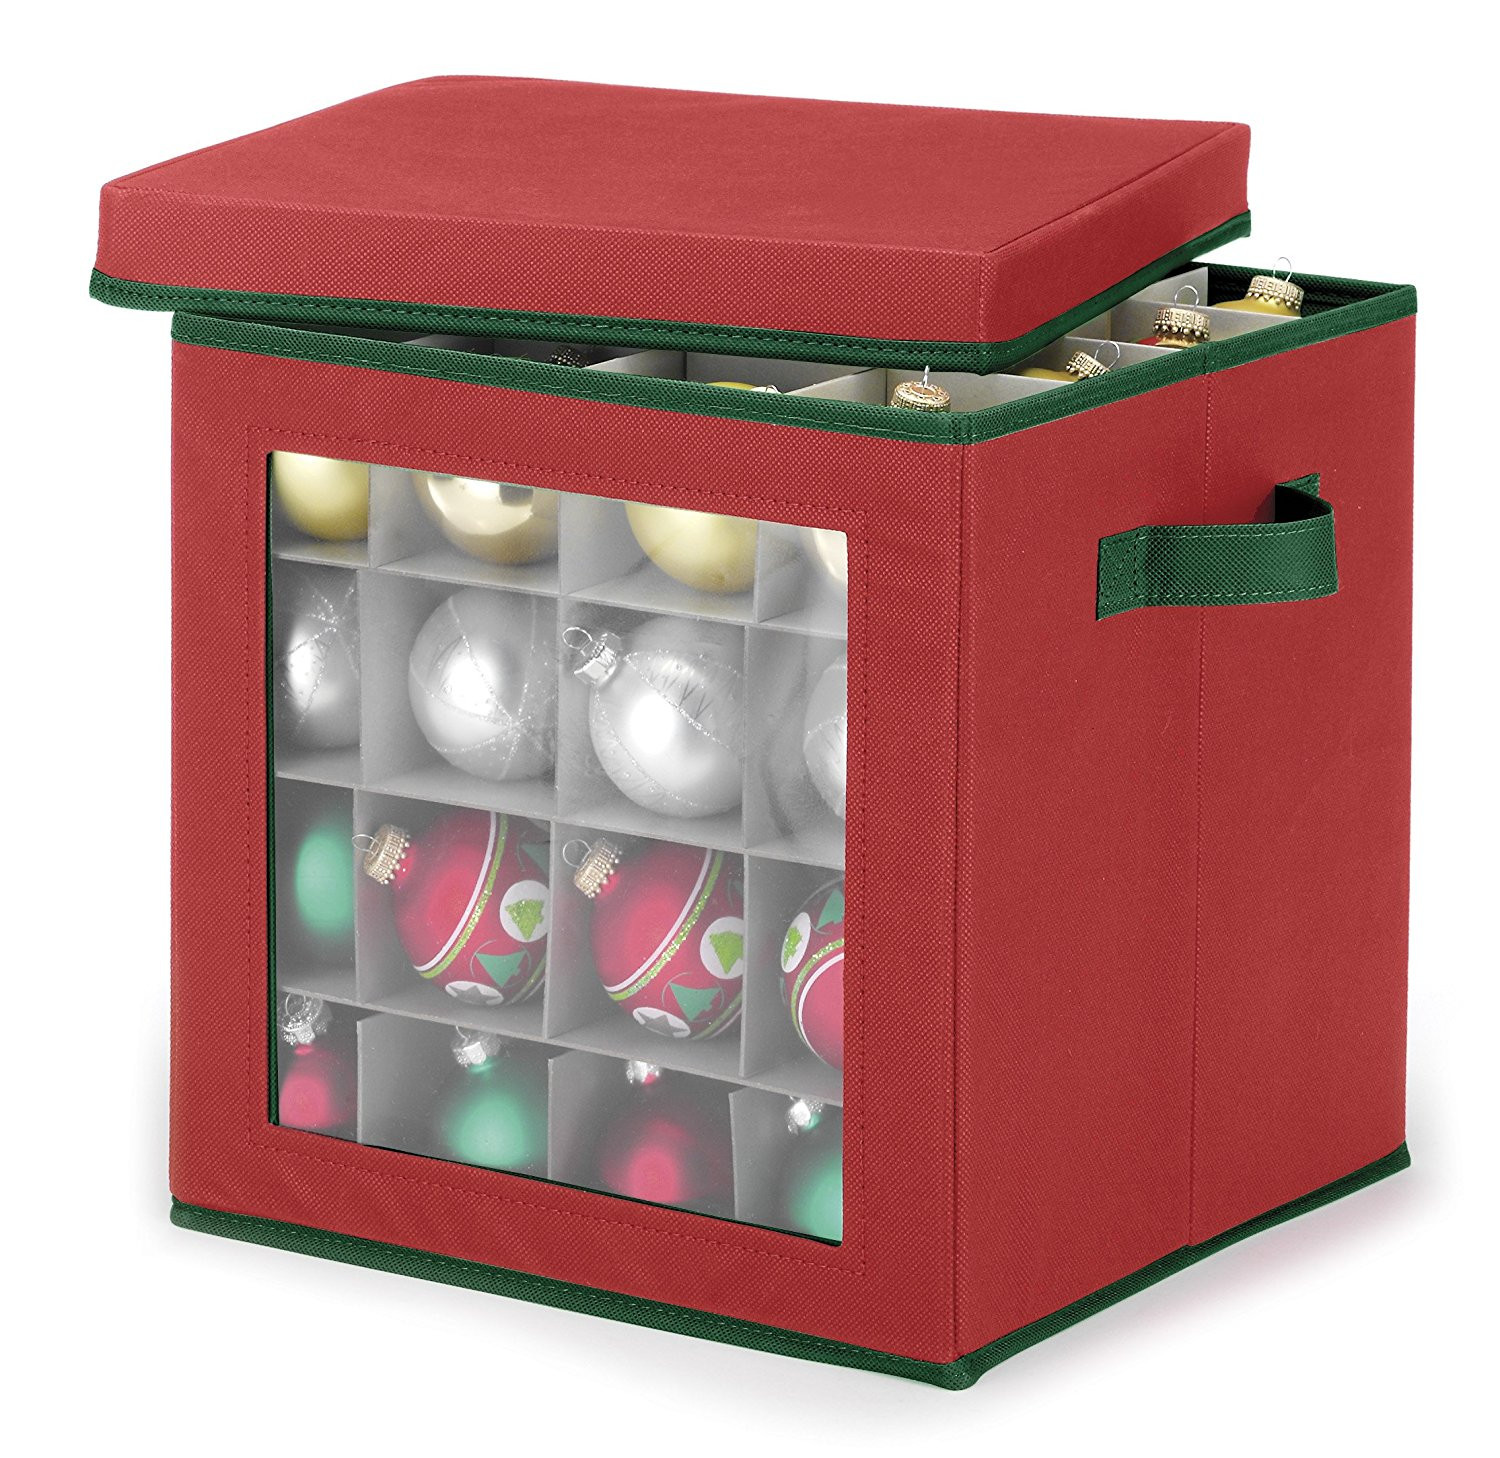 Christmas Storage Bins
 Must Have Christmas Storage and Organization Ideas The